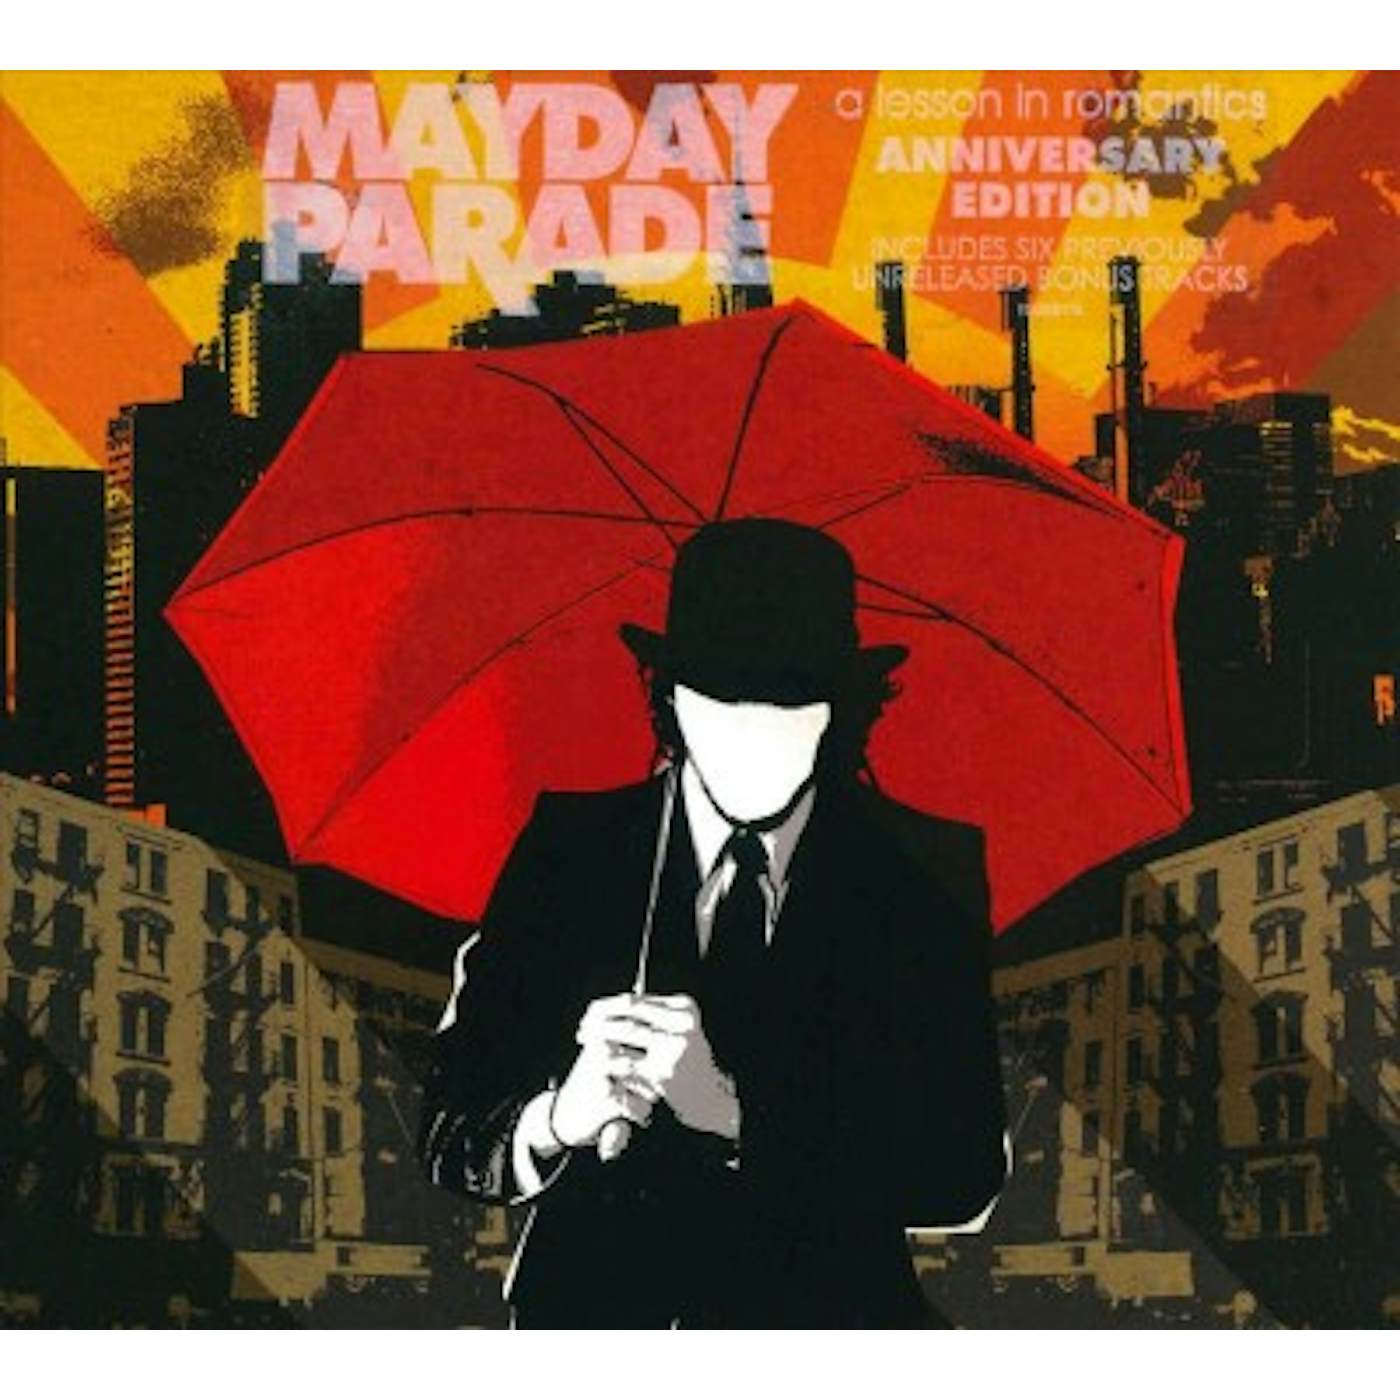 Mayday Parade A Lesson In Romantics (Anniversary Edition) CD